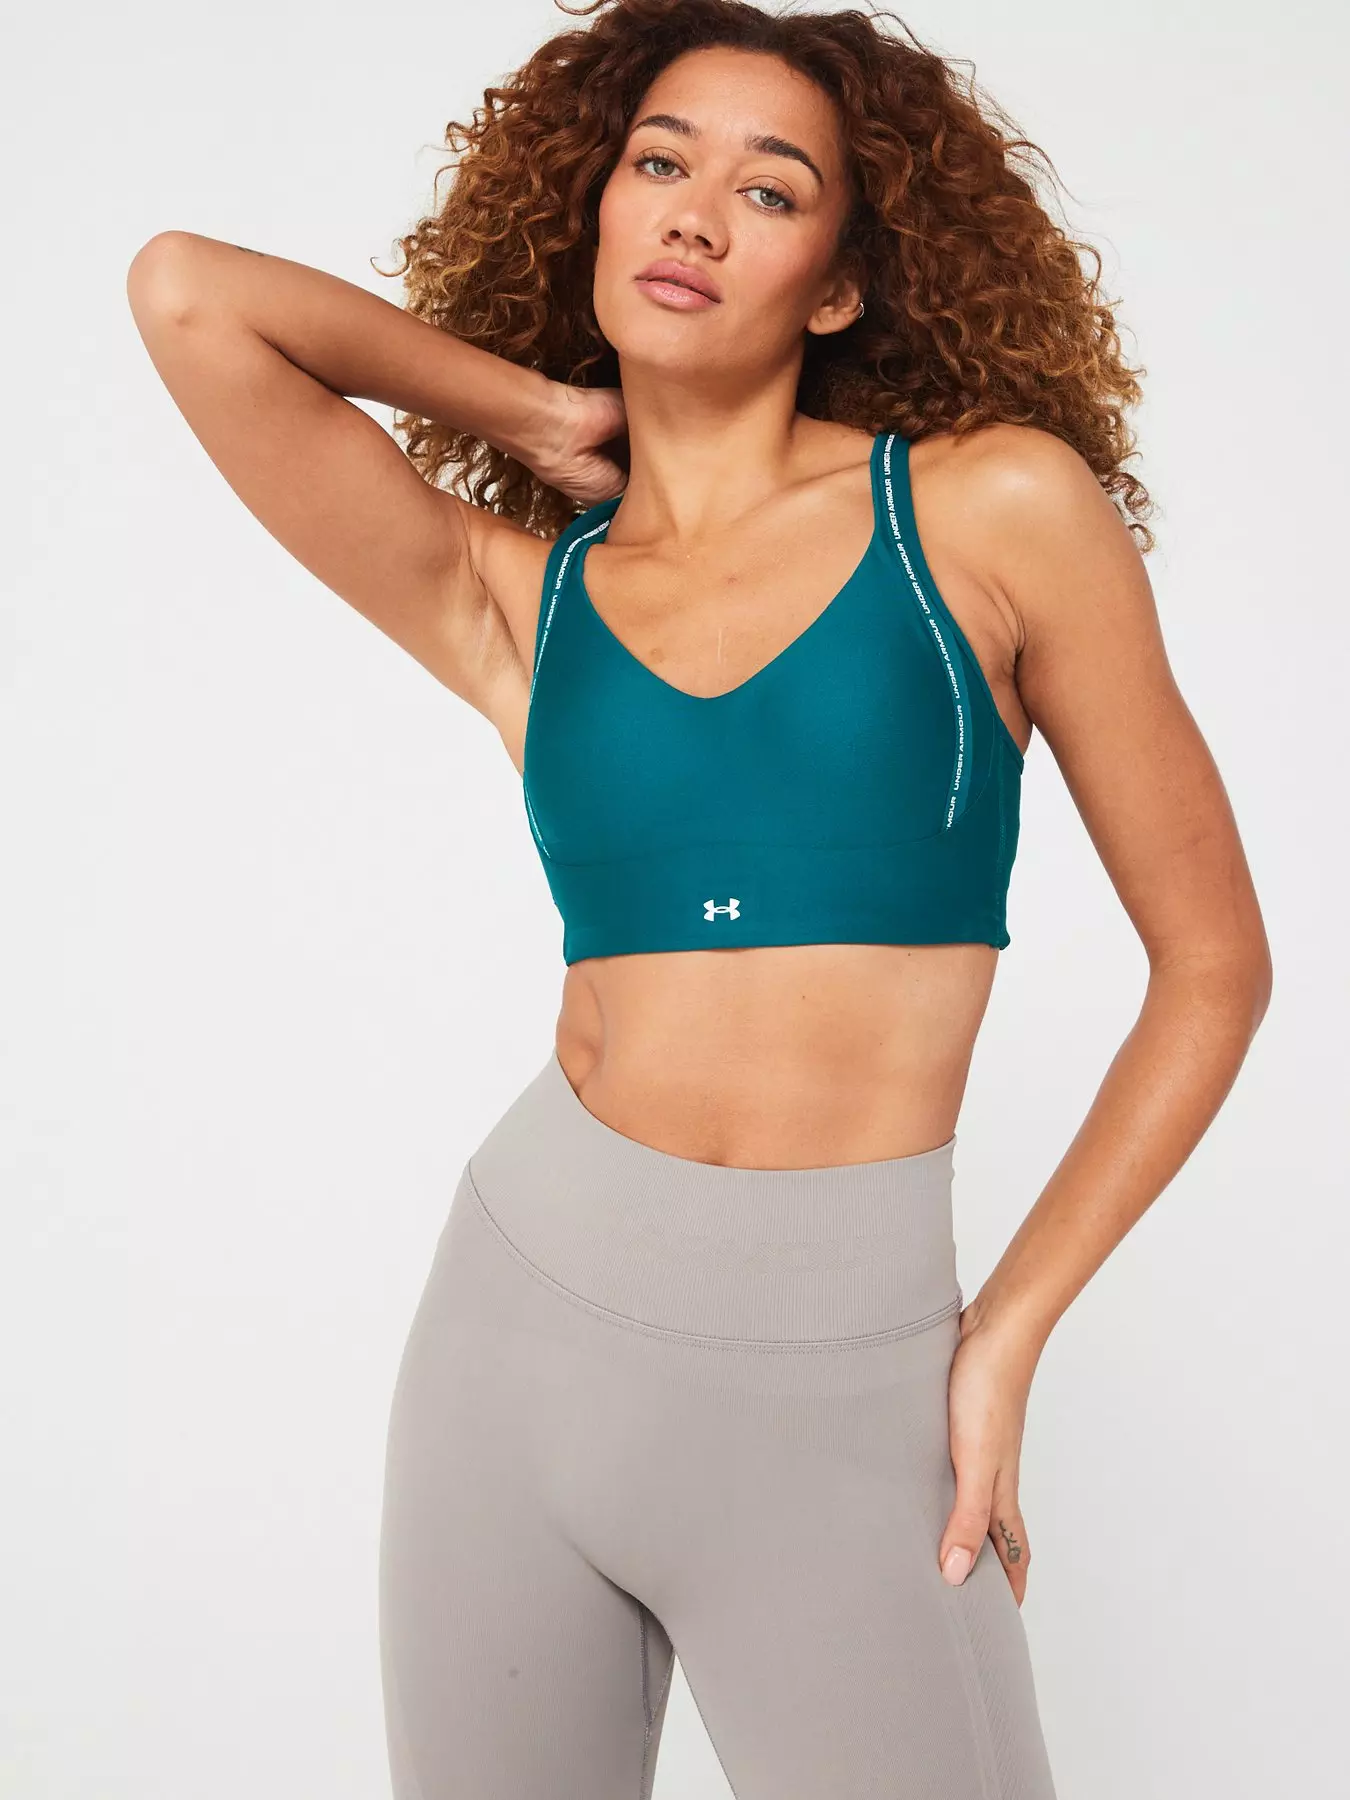 Natural Uniforms Women’s Longline Wirefree Padded Medium Support Sports Bra  (Small, Charcoal)